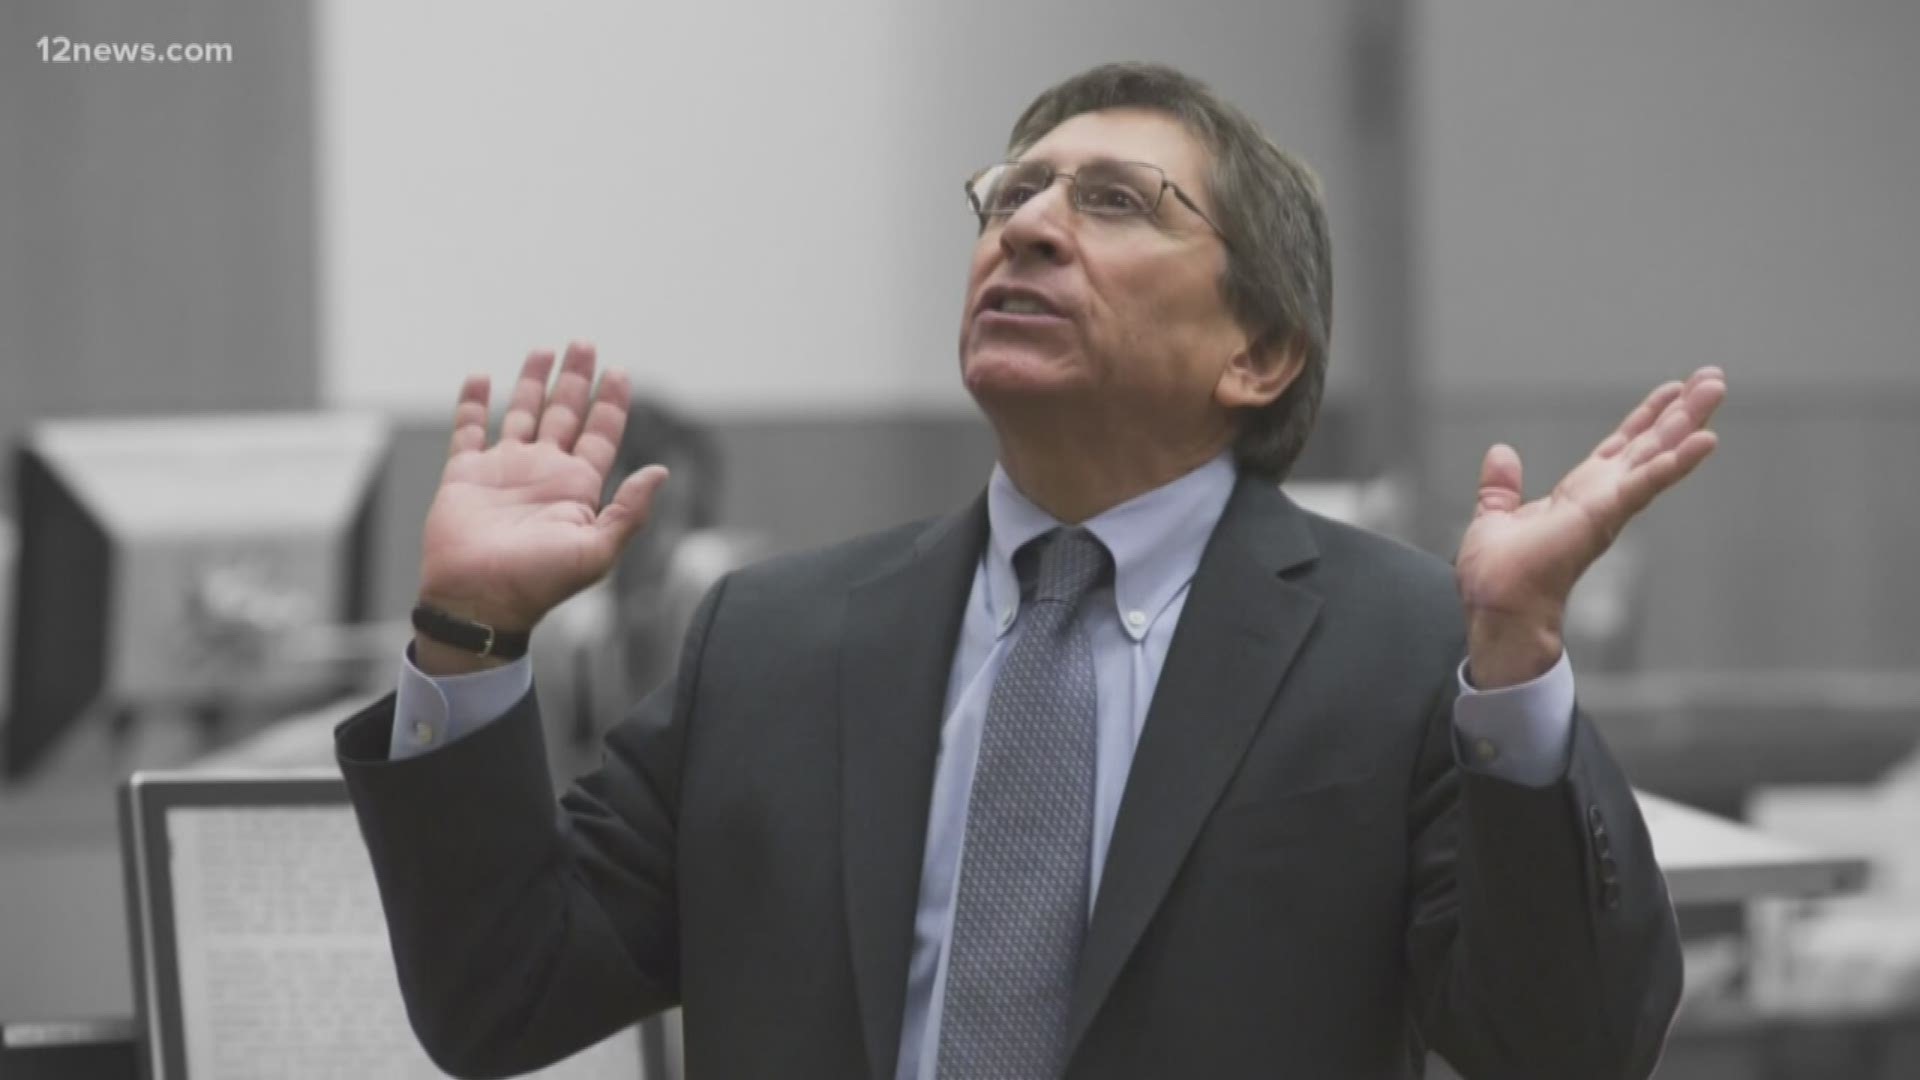 Jodi Arias is appealing her murder conviction. Brahm Resnik has the story.